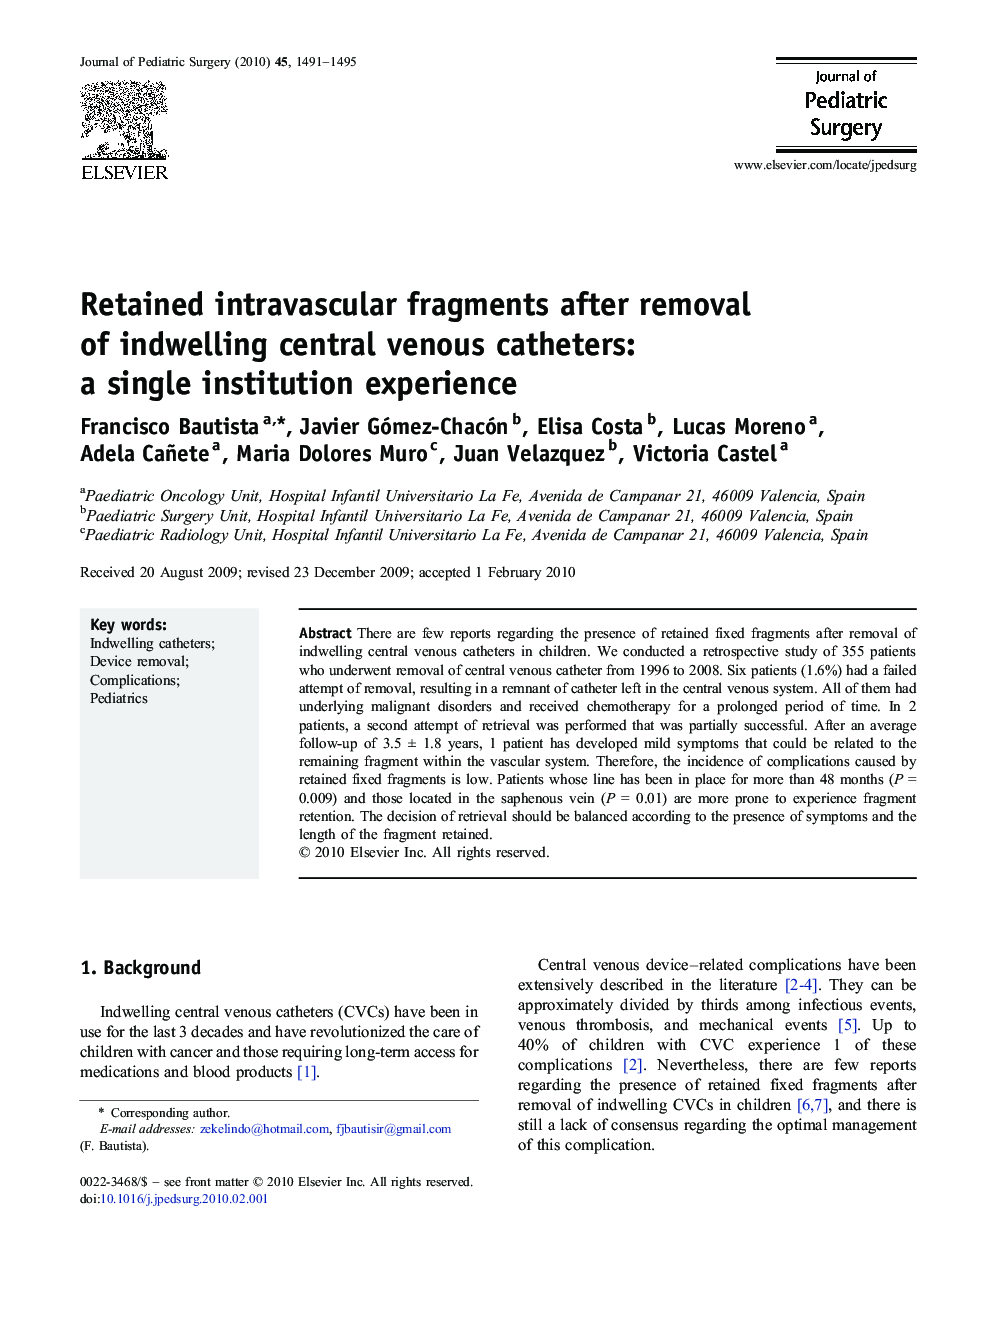 Retained intravascular fragments after removal of indwelling central venous catheters: a single institution experience